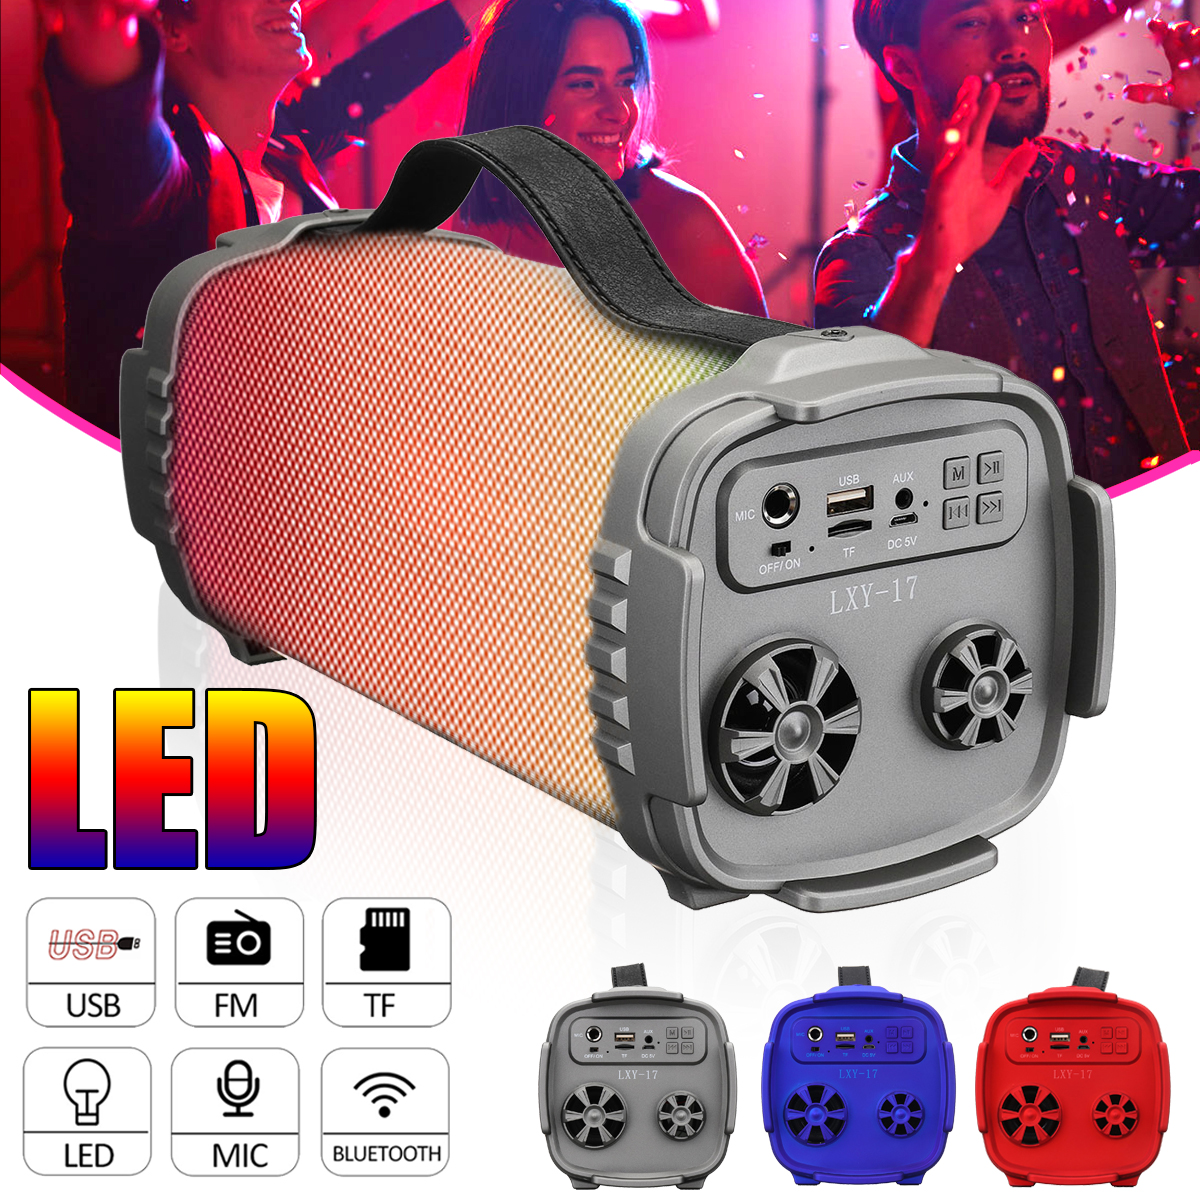 Portable-Wireless-bluetooth-Speaker-Colorful-LED-Light-Outdoor-Stereo-Bass-FM-Radio-TF-Card-Speaker-1388743-1